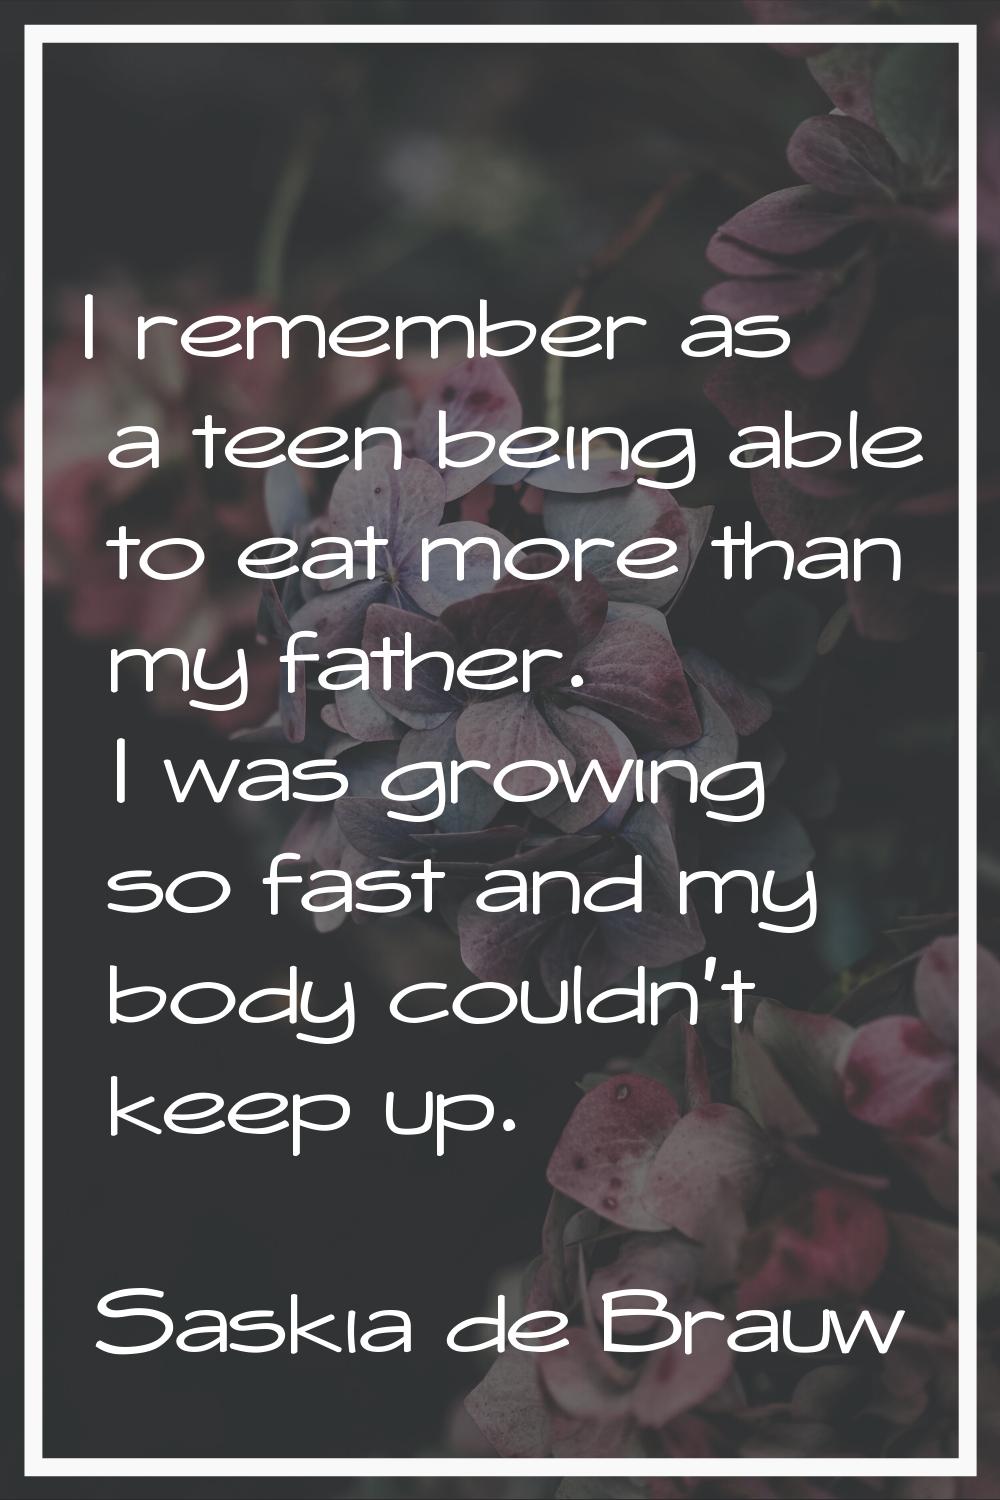 I remember as a teen being able to eat more than my father. I was growing so fast and my body could